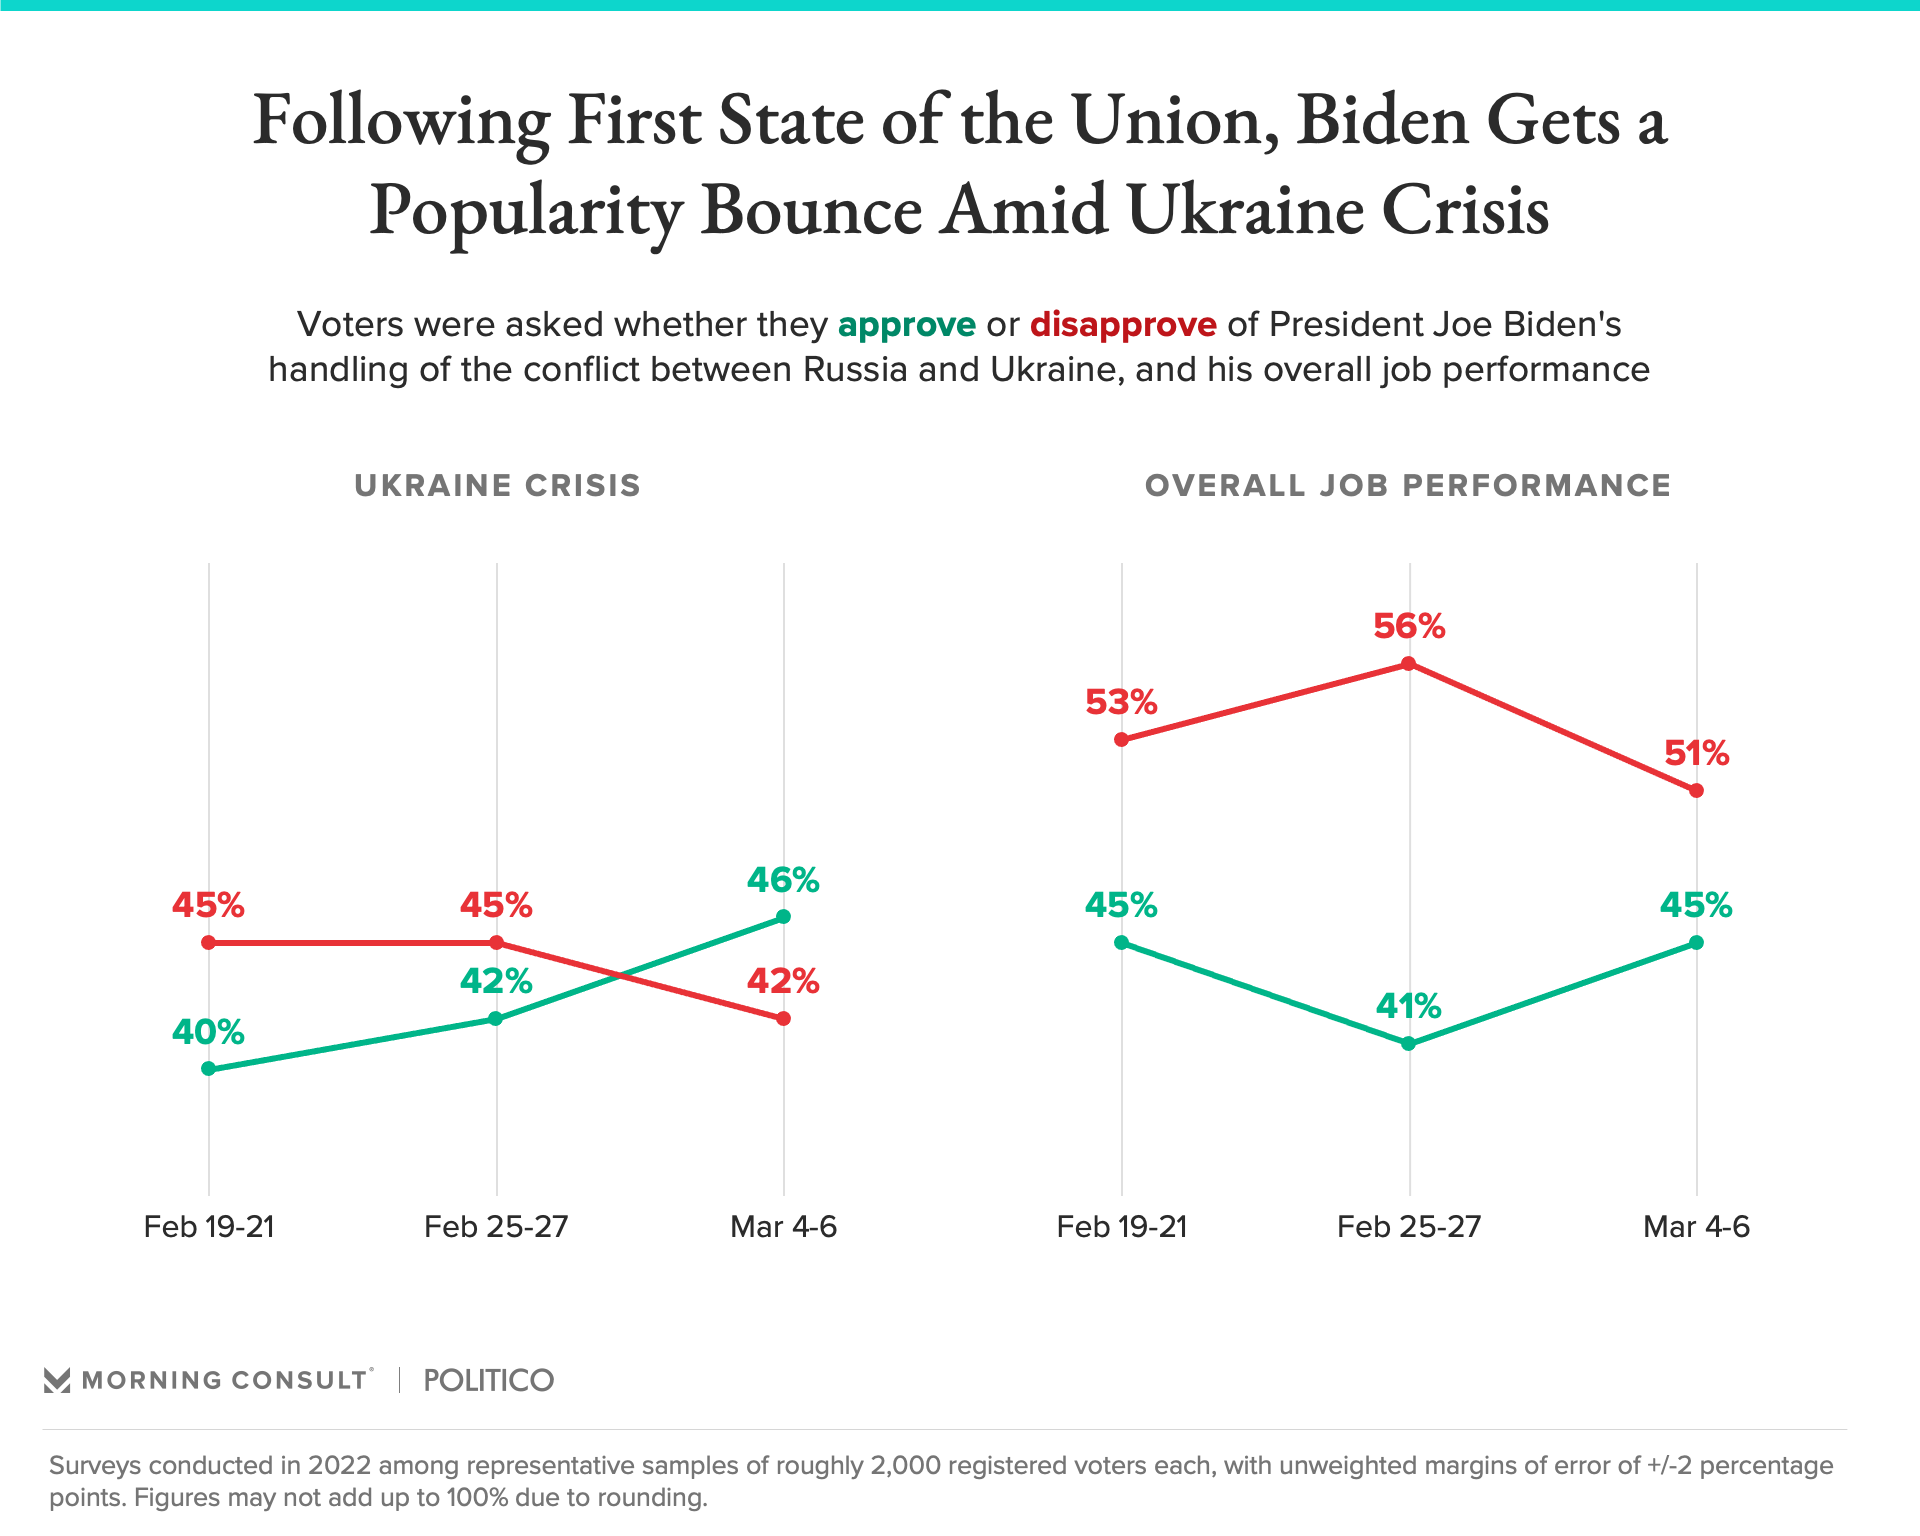 Biden's approval rating during the ukraine crisis